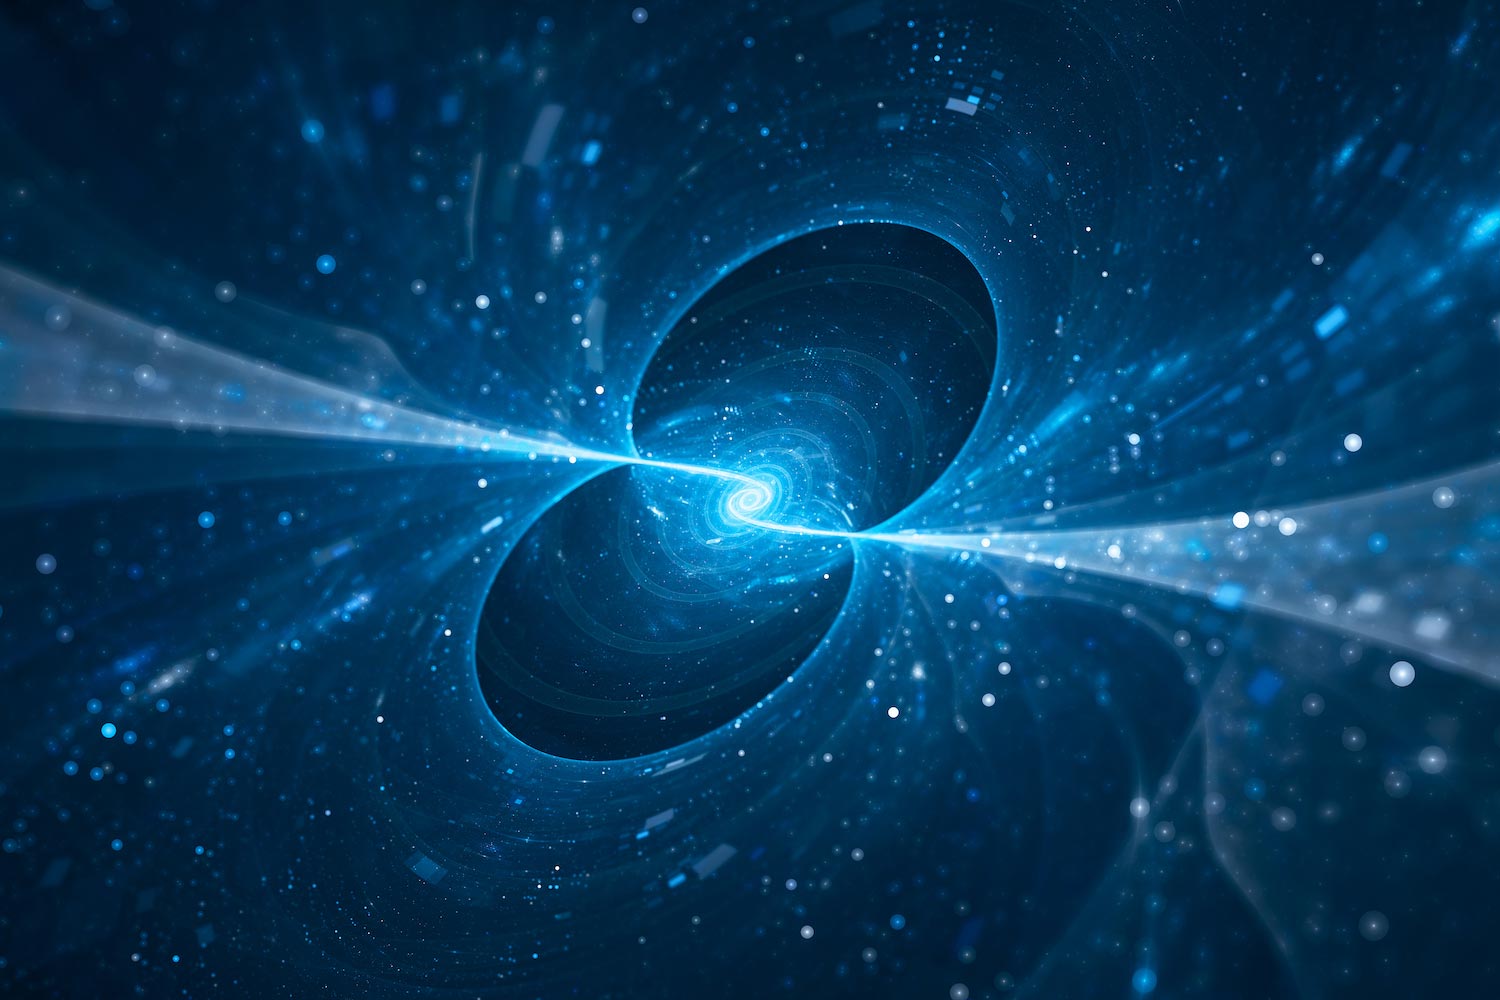 Clues to missing components of the universe from ripples in space-time